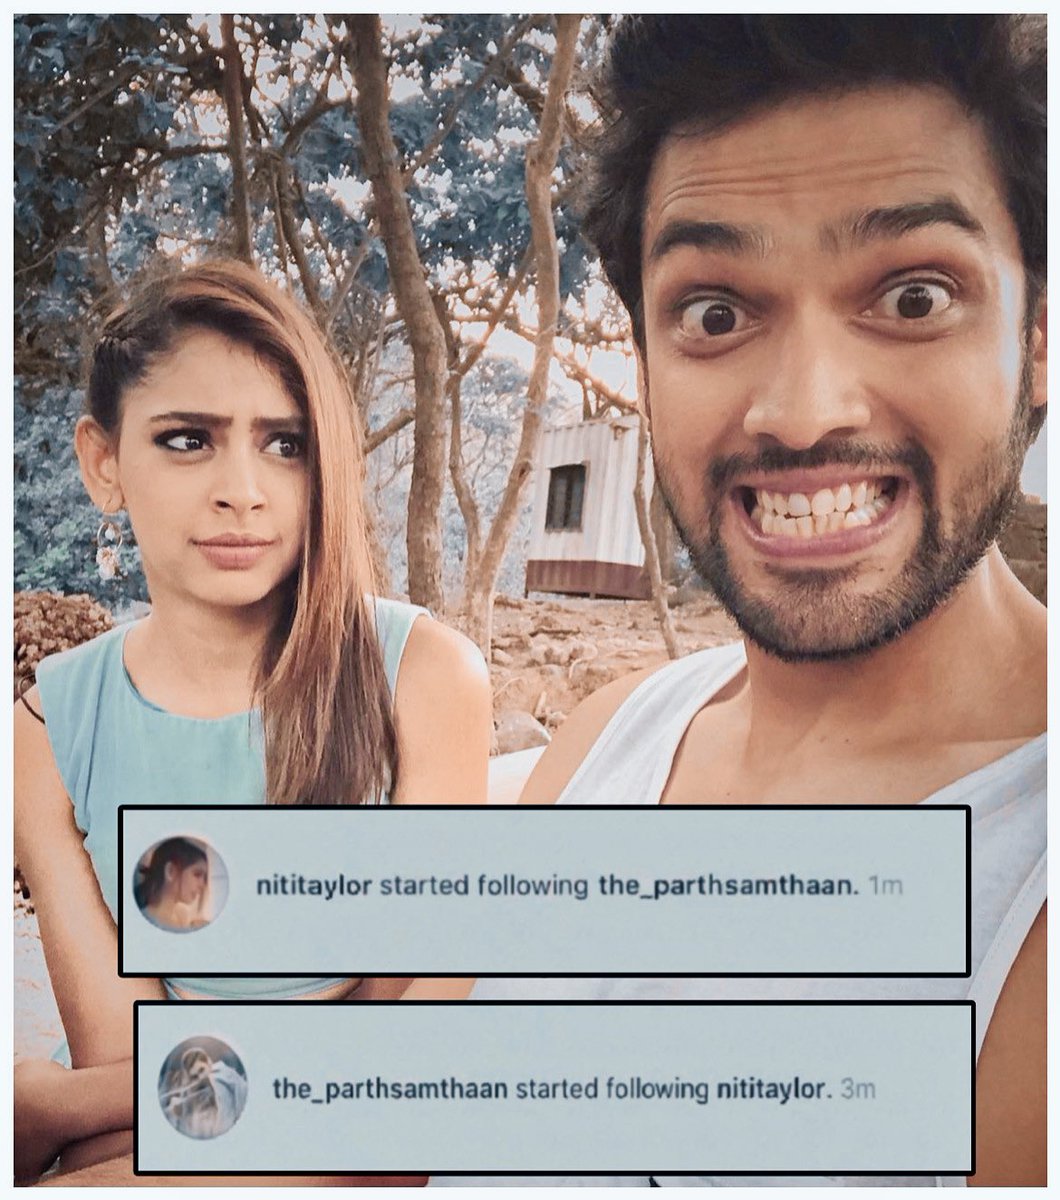 “HAPPY PaNi DAY” 😭💫❤️ Exactly 5 years ago they followed each other on Instagram, 2014 ka sapna pura hua 😩❤️ and from this day the bond has just grown stronger and beautiful. 2018 was the best era! Goofballs FL 🙌🏻 { #ParthSamthaan #NitiTaylor #MaNan #Kyy }